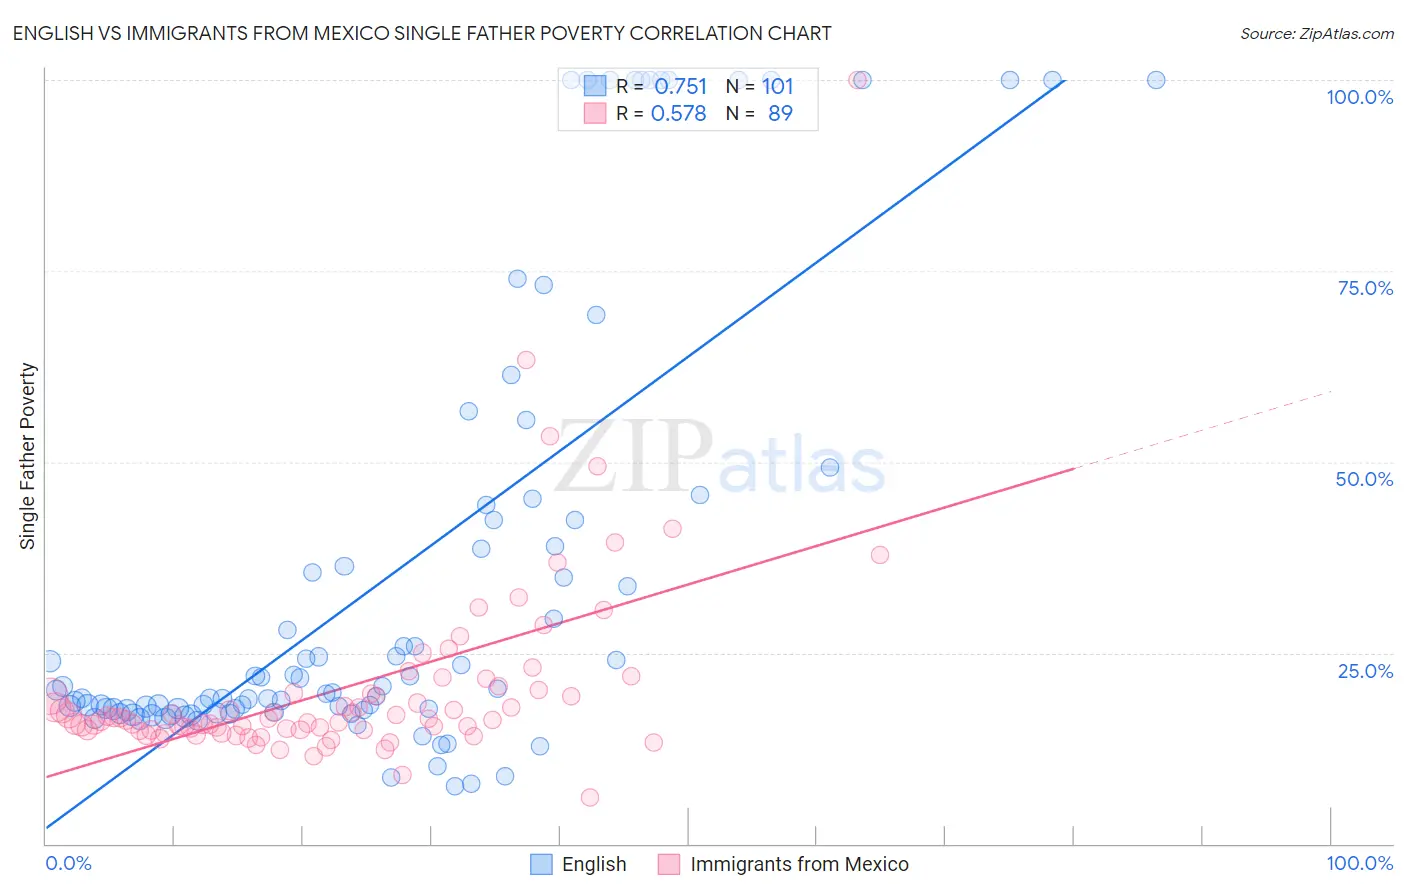 English vs Immigrants from Mexico Single Father Poverty